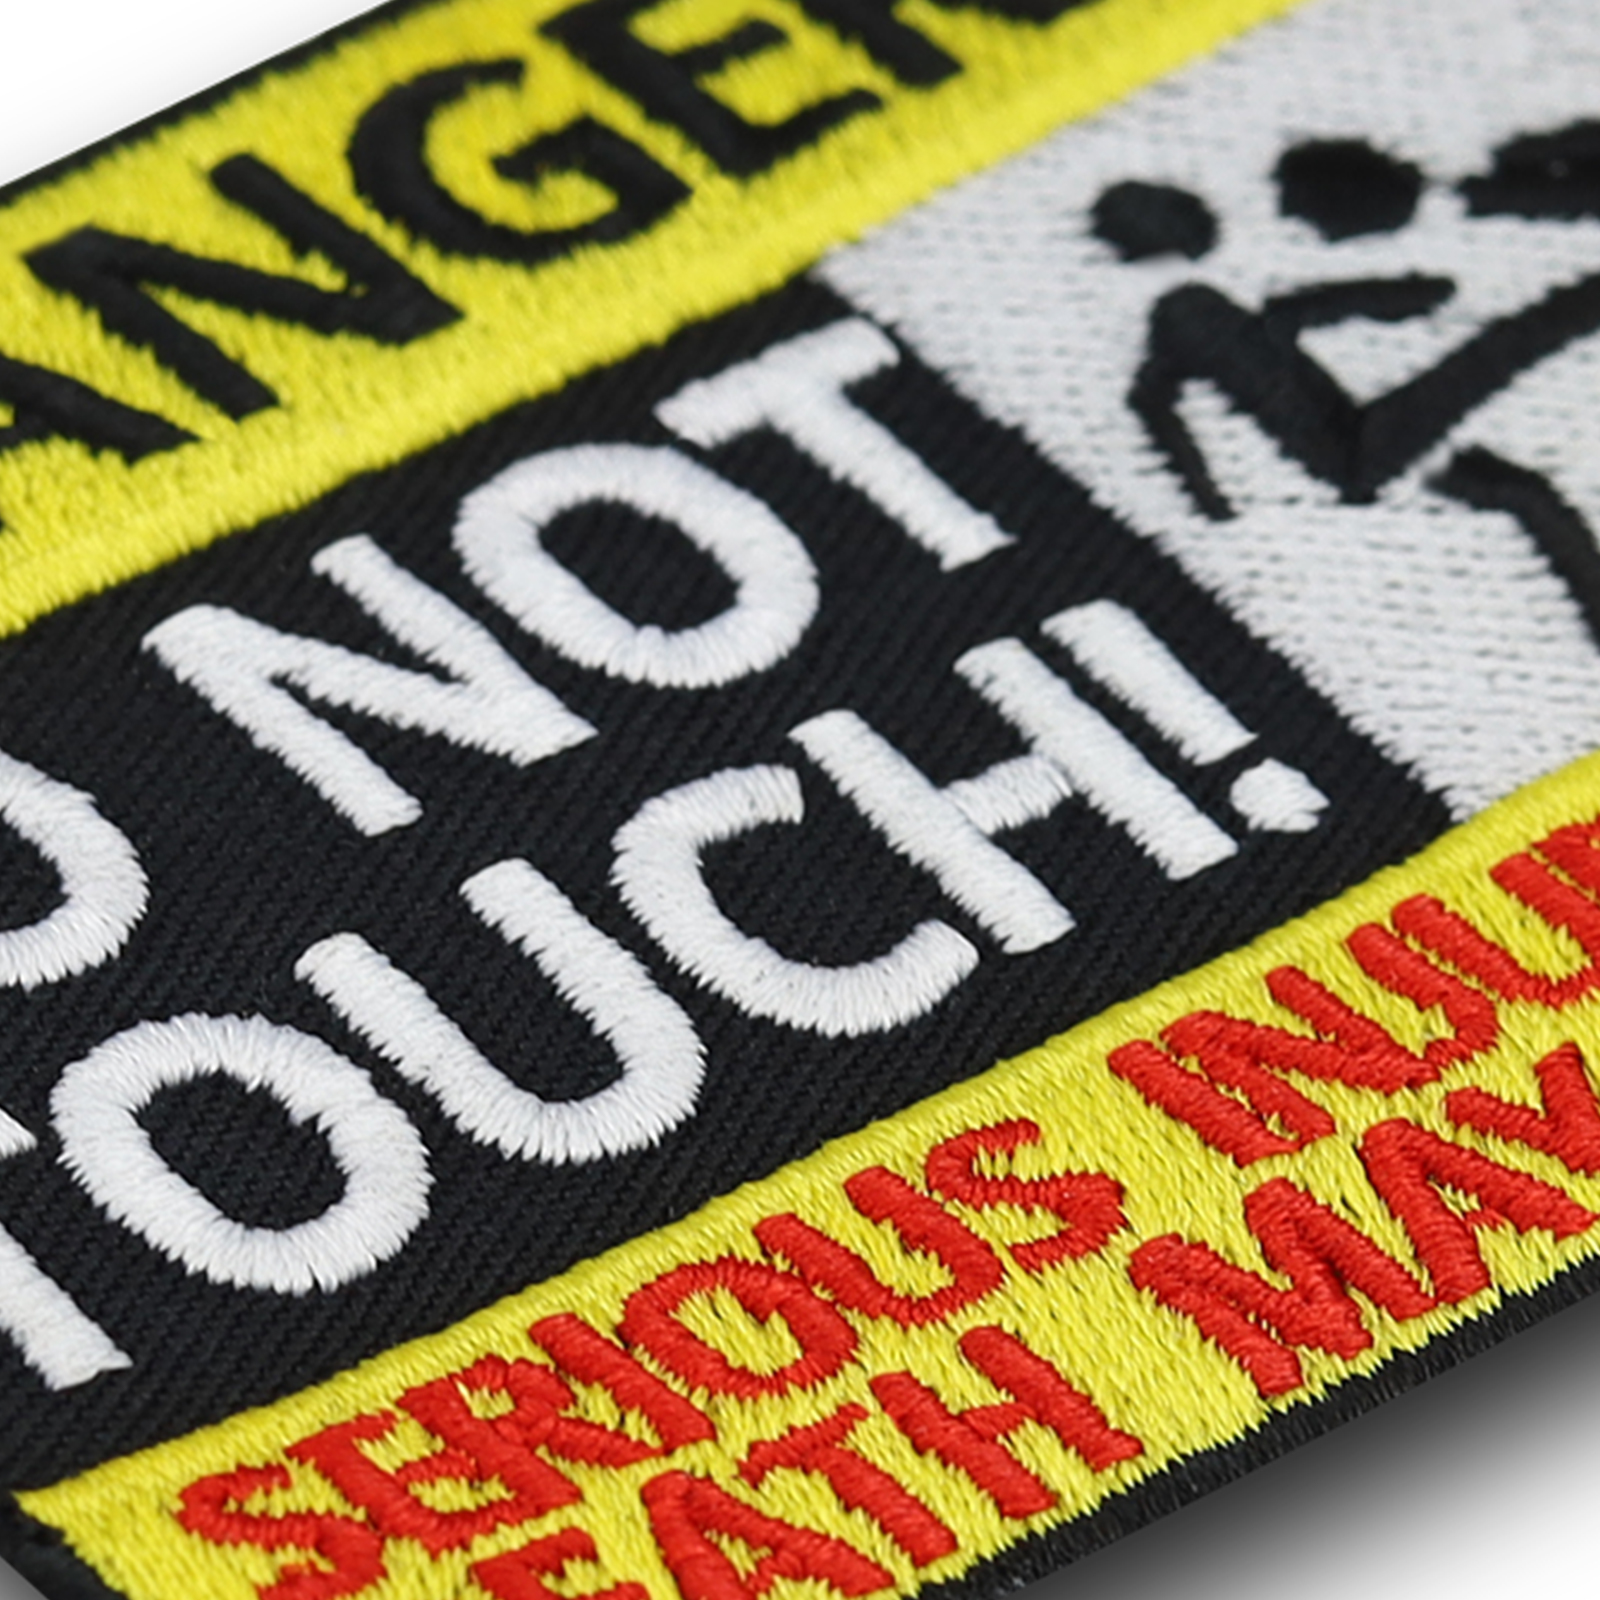 Danger - Do not touch - Patch